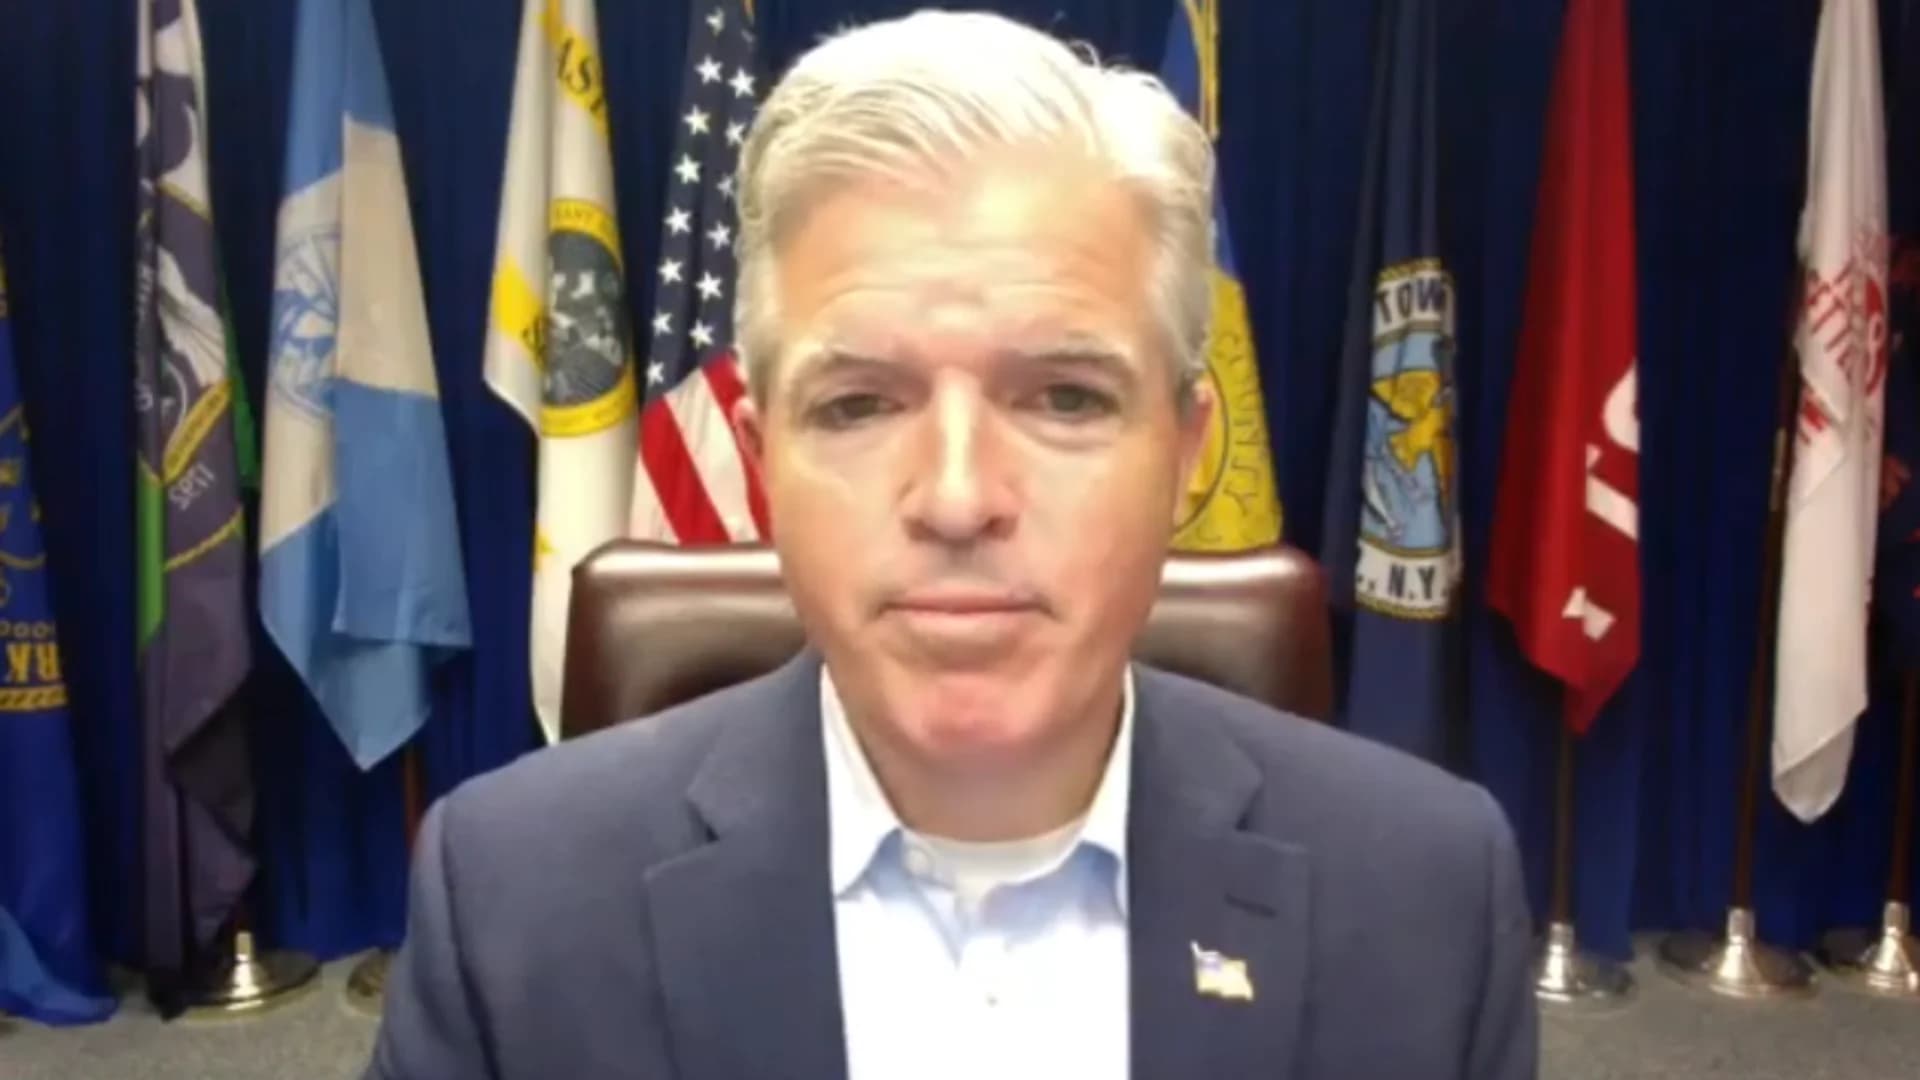 County Executive Steve Bellone gives update on Suffolk's COVID-19 response